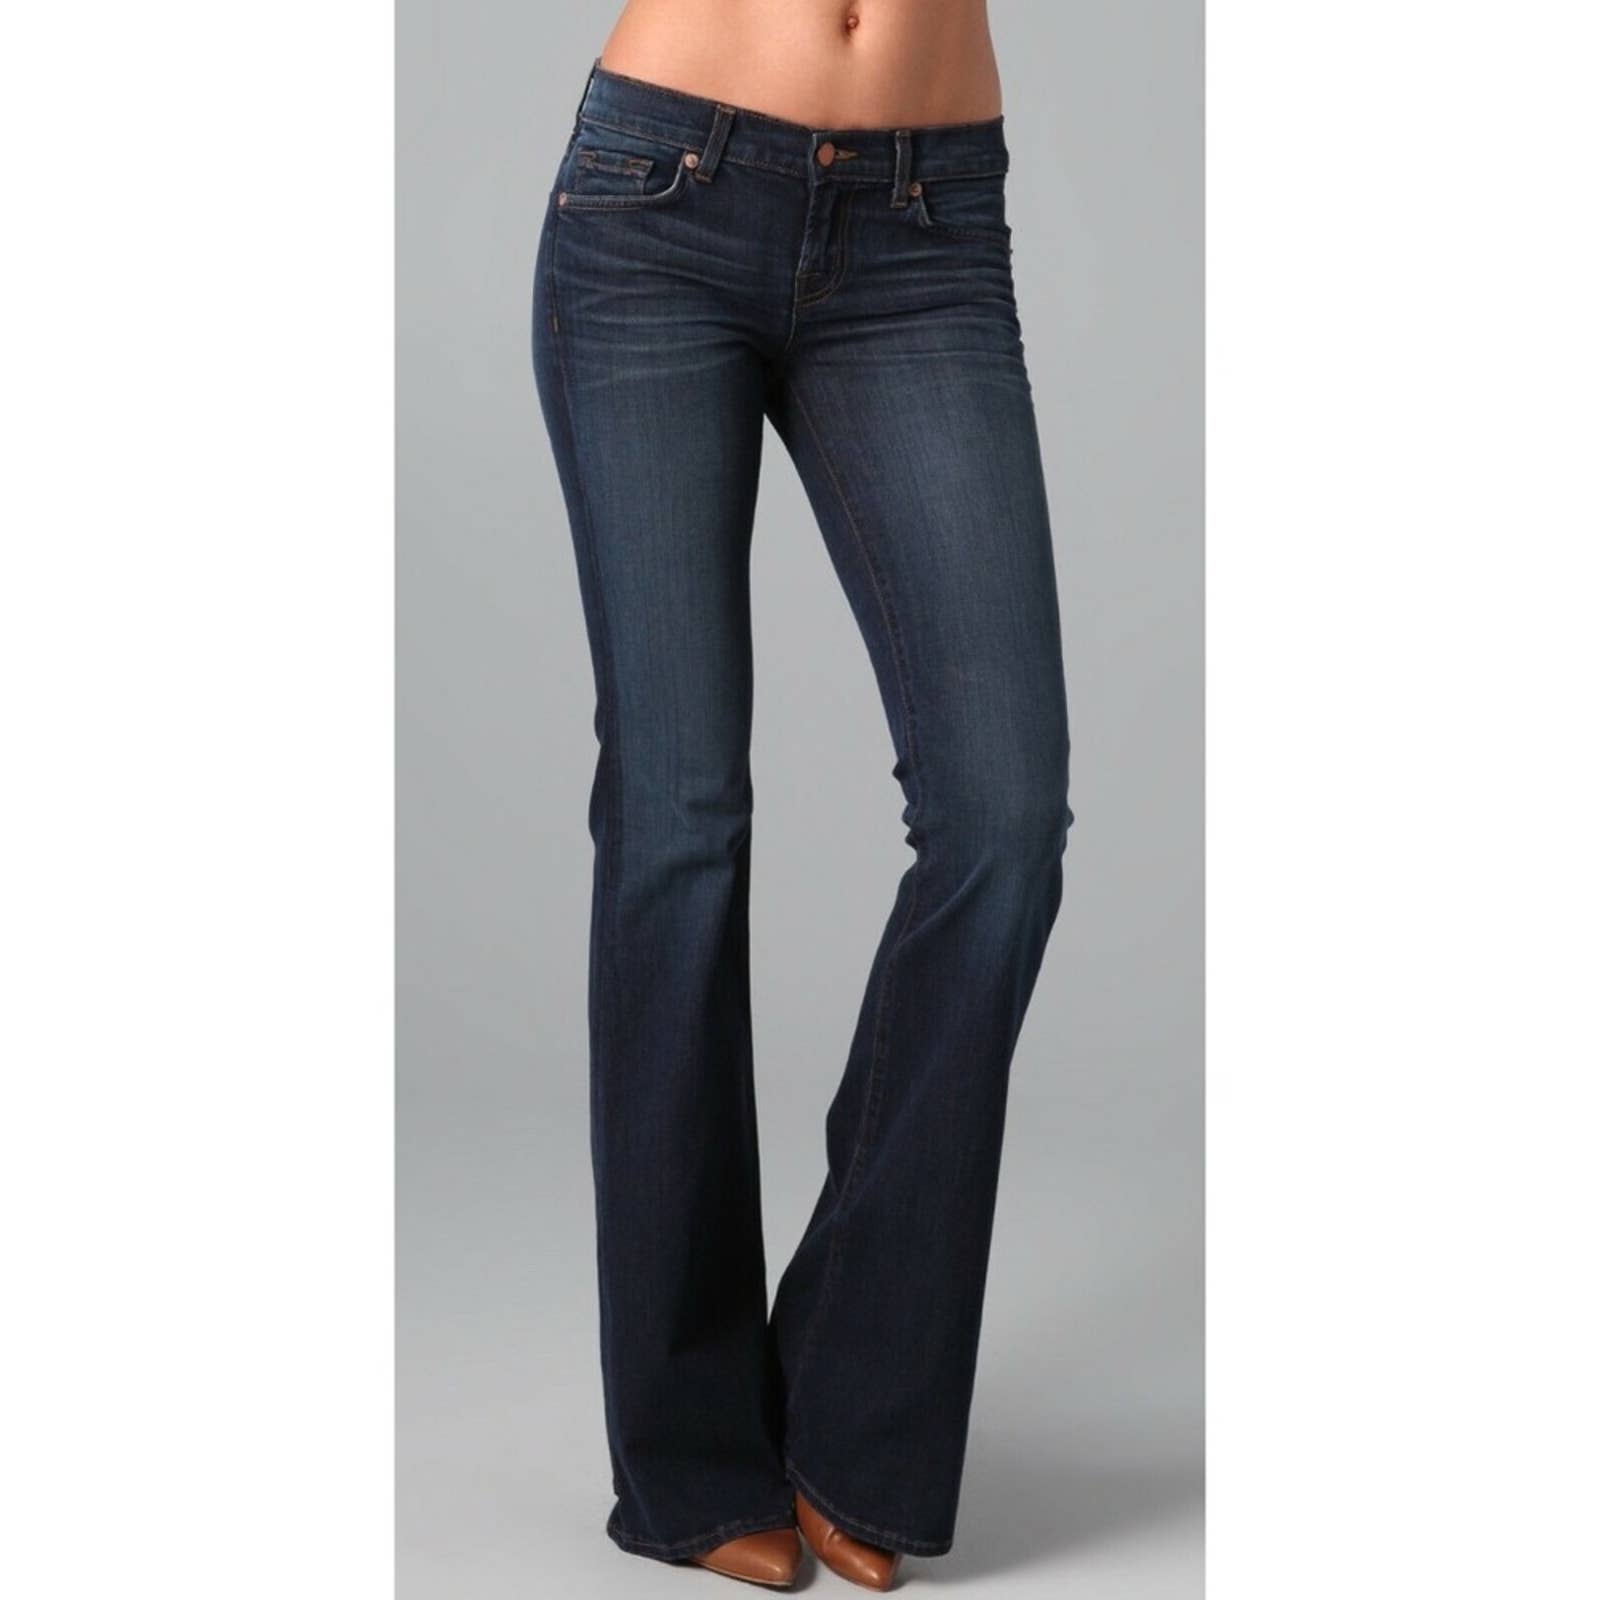 size 27 J Brand Babe Flare Leg Bell Bottom Stretch Jeans – Thrifty